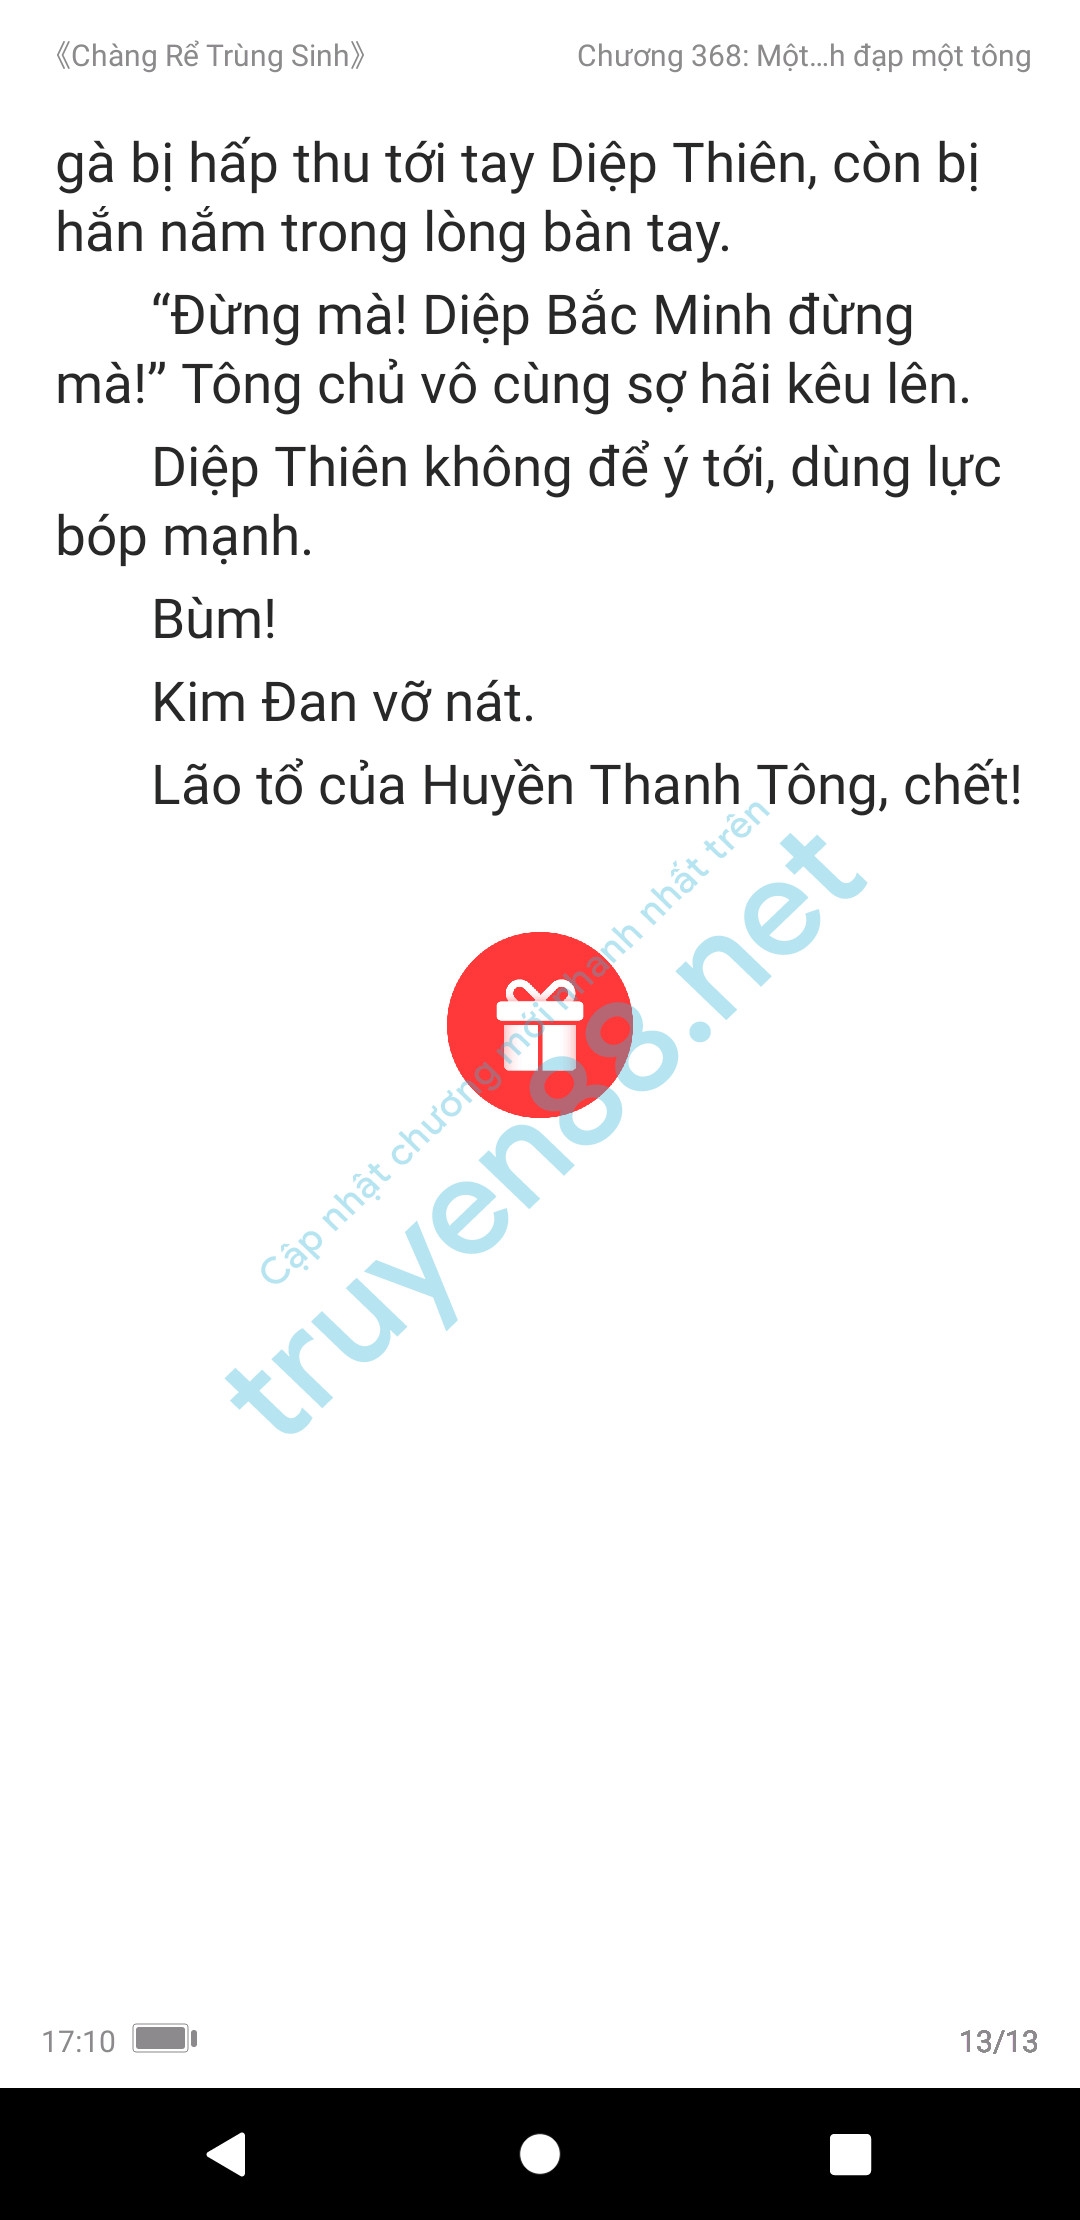 chang-re-trung-sinh-368-1